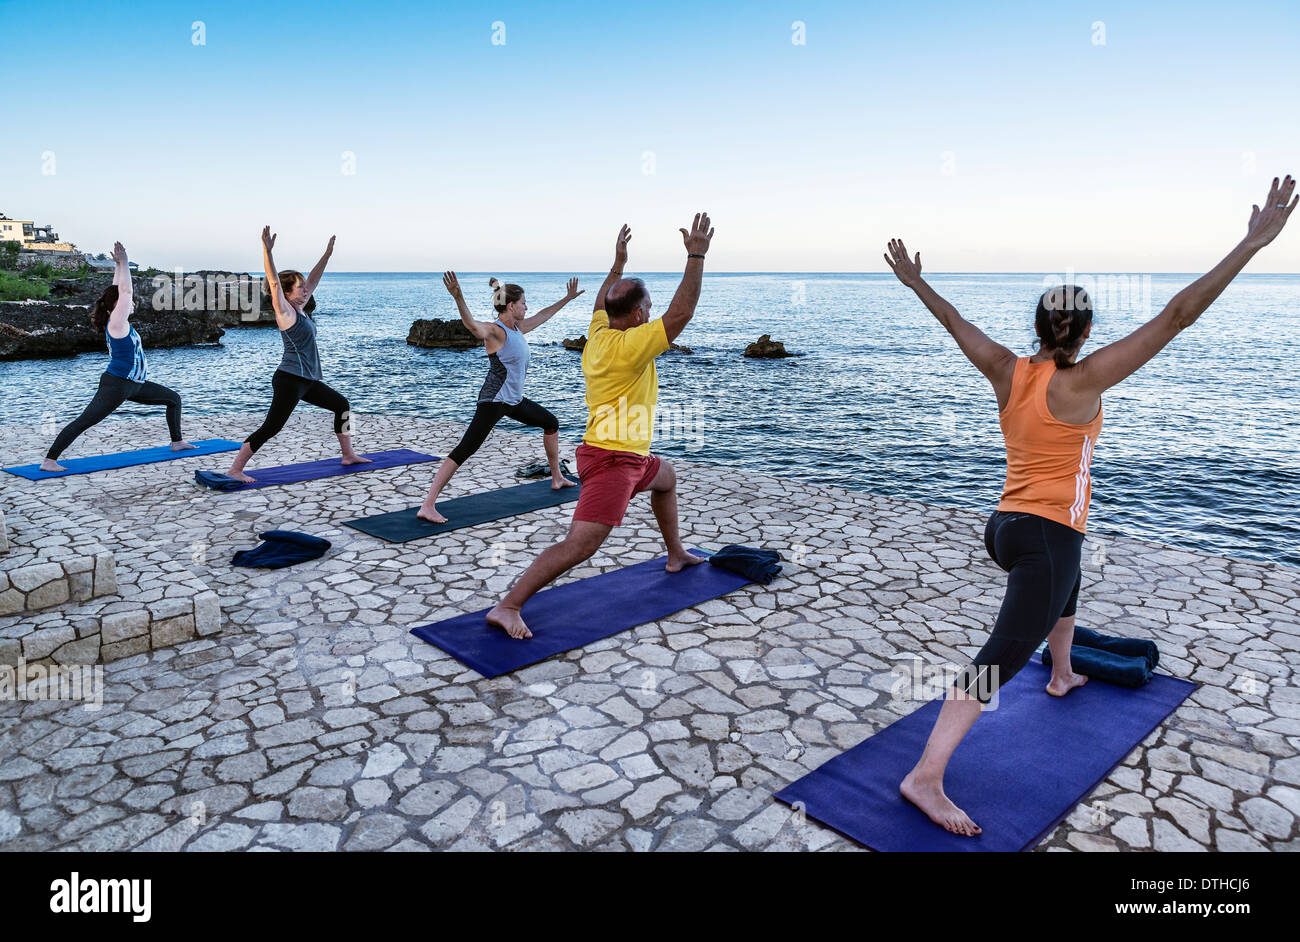 Waterfront instruction at a yoga retreat, Negril, Jamaica Stock Photo